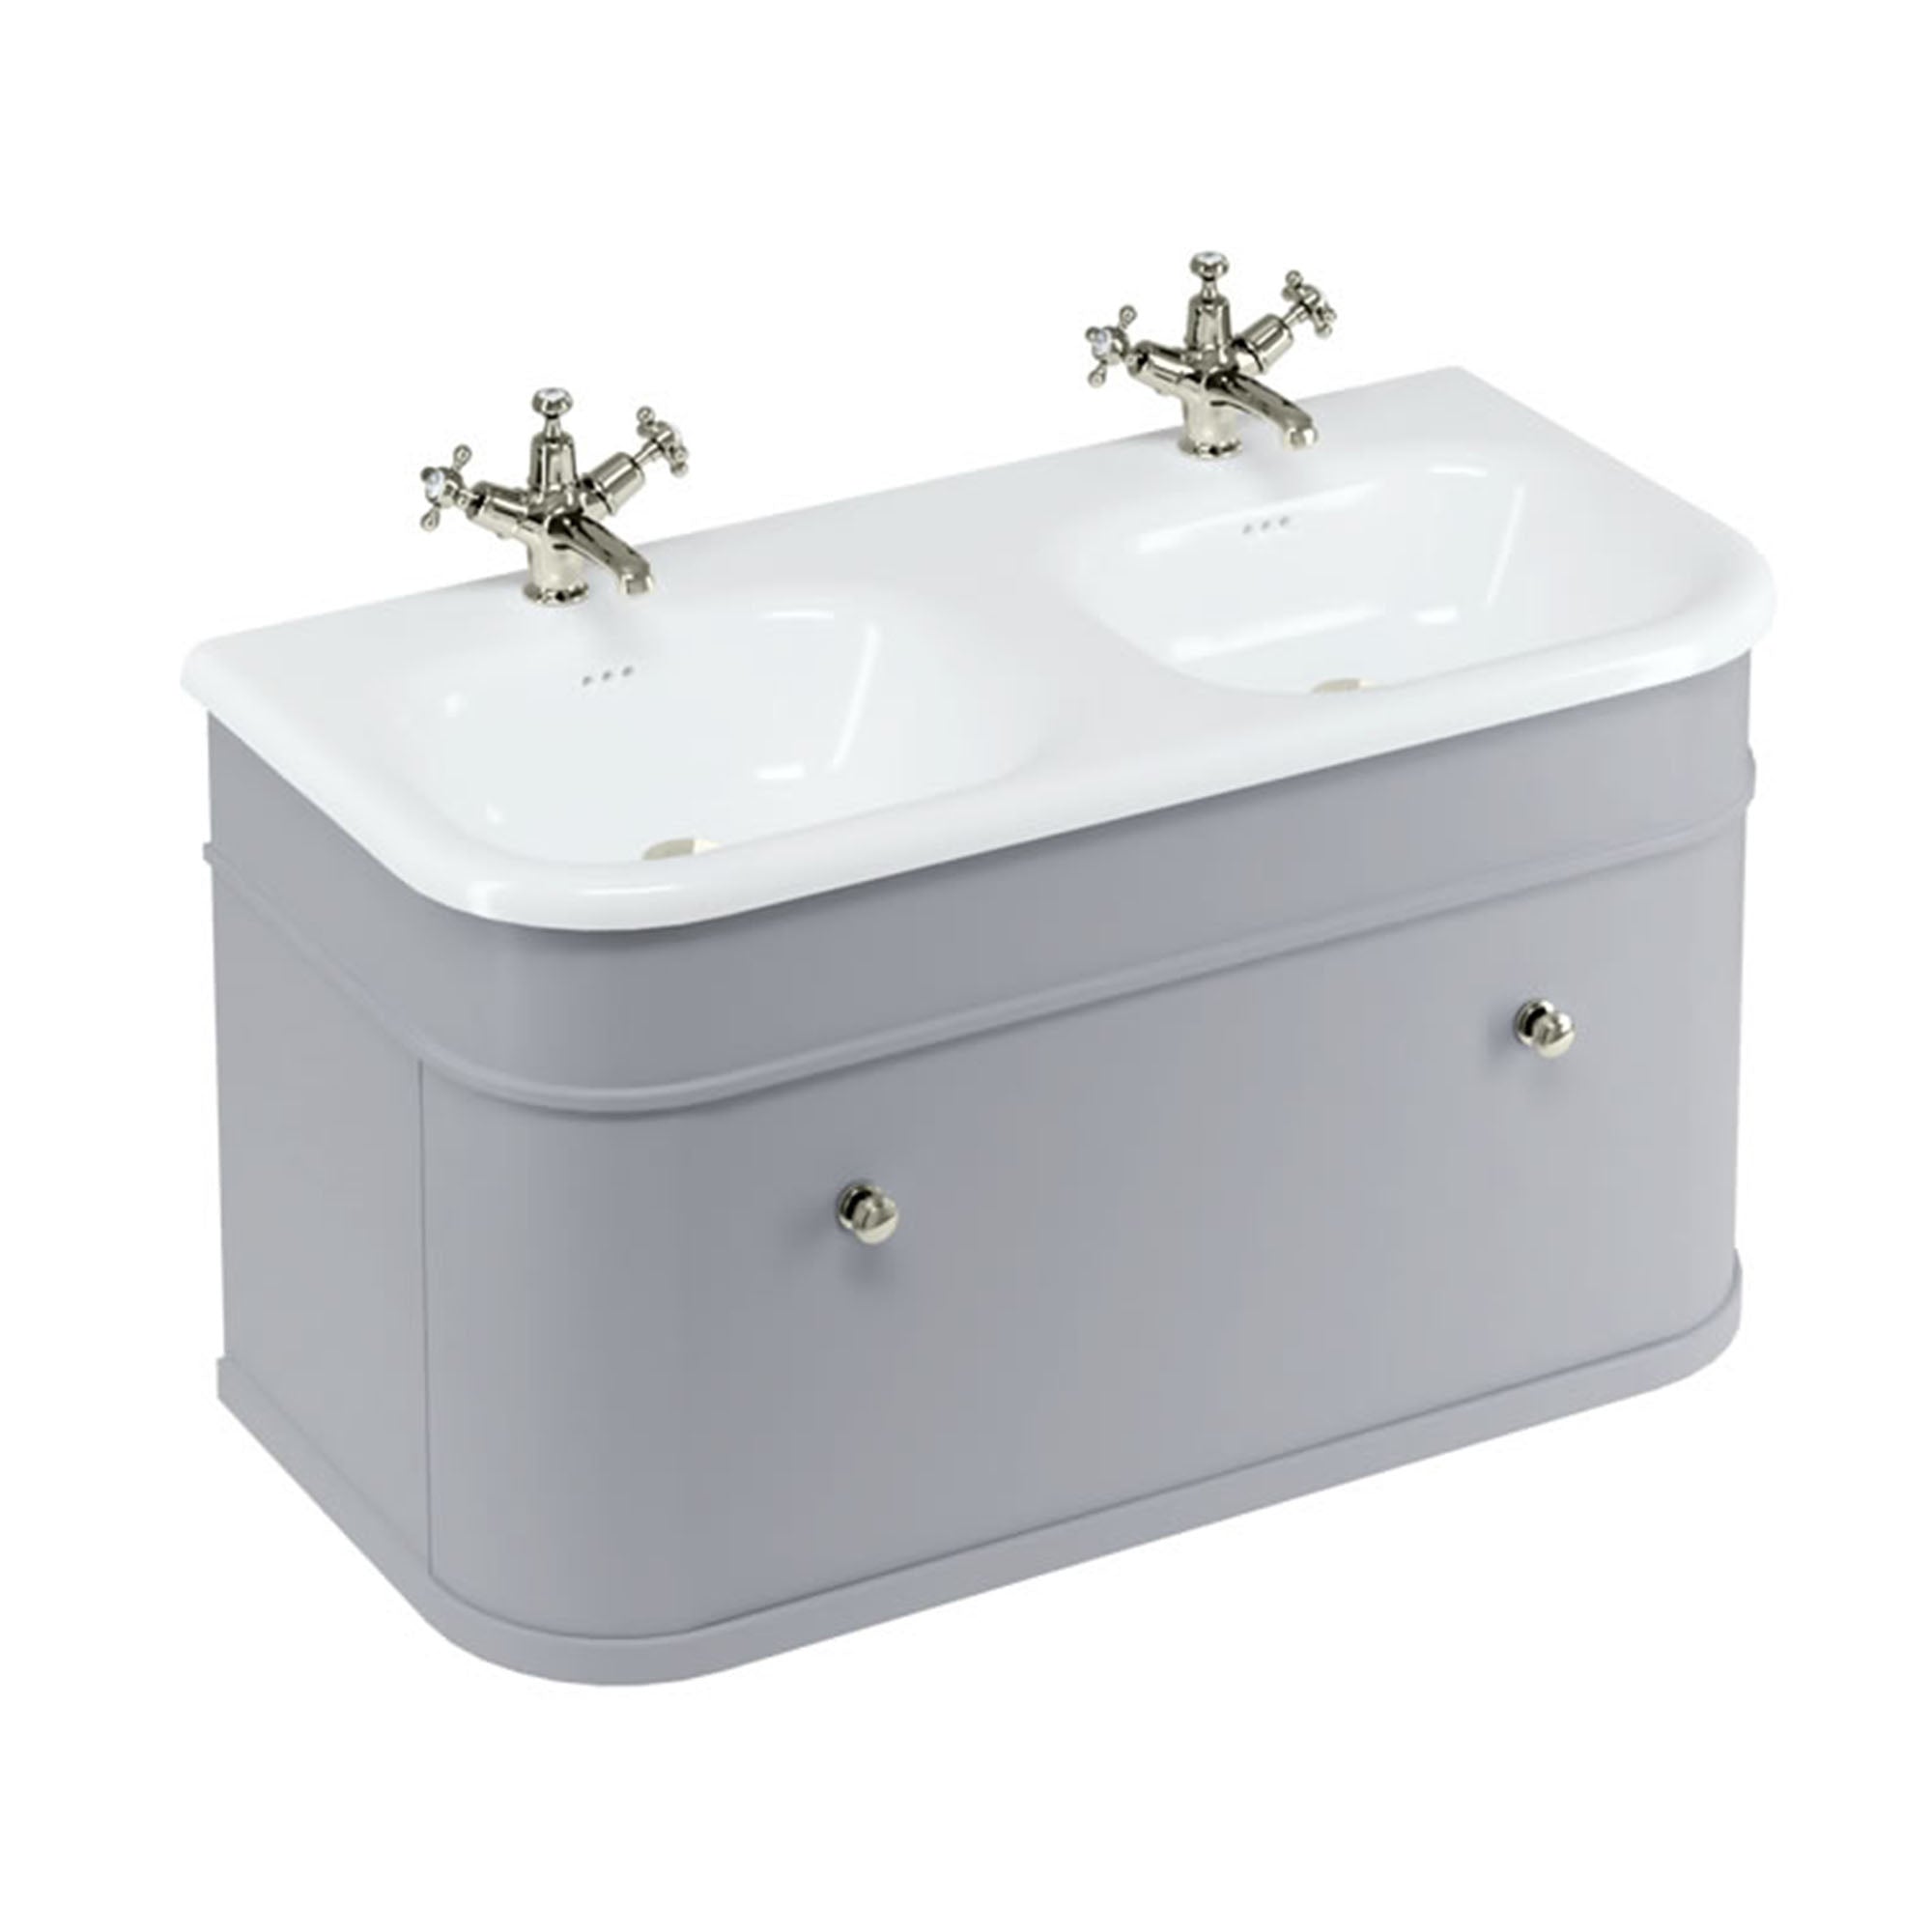 burlington chalfont 1000 wall mounted vanity unit with double roll top basin classic grey